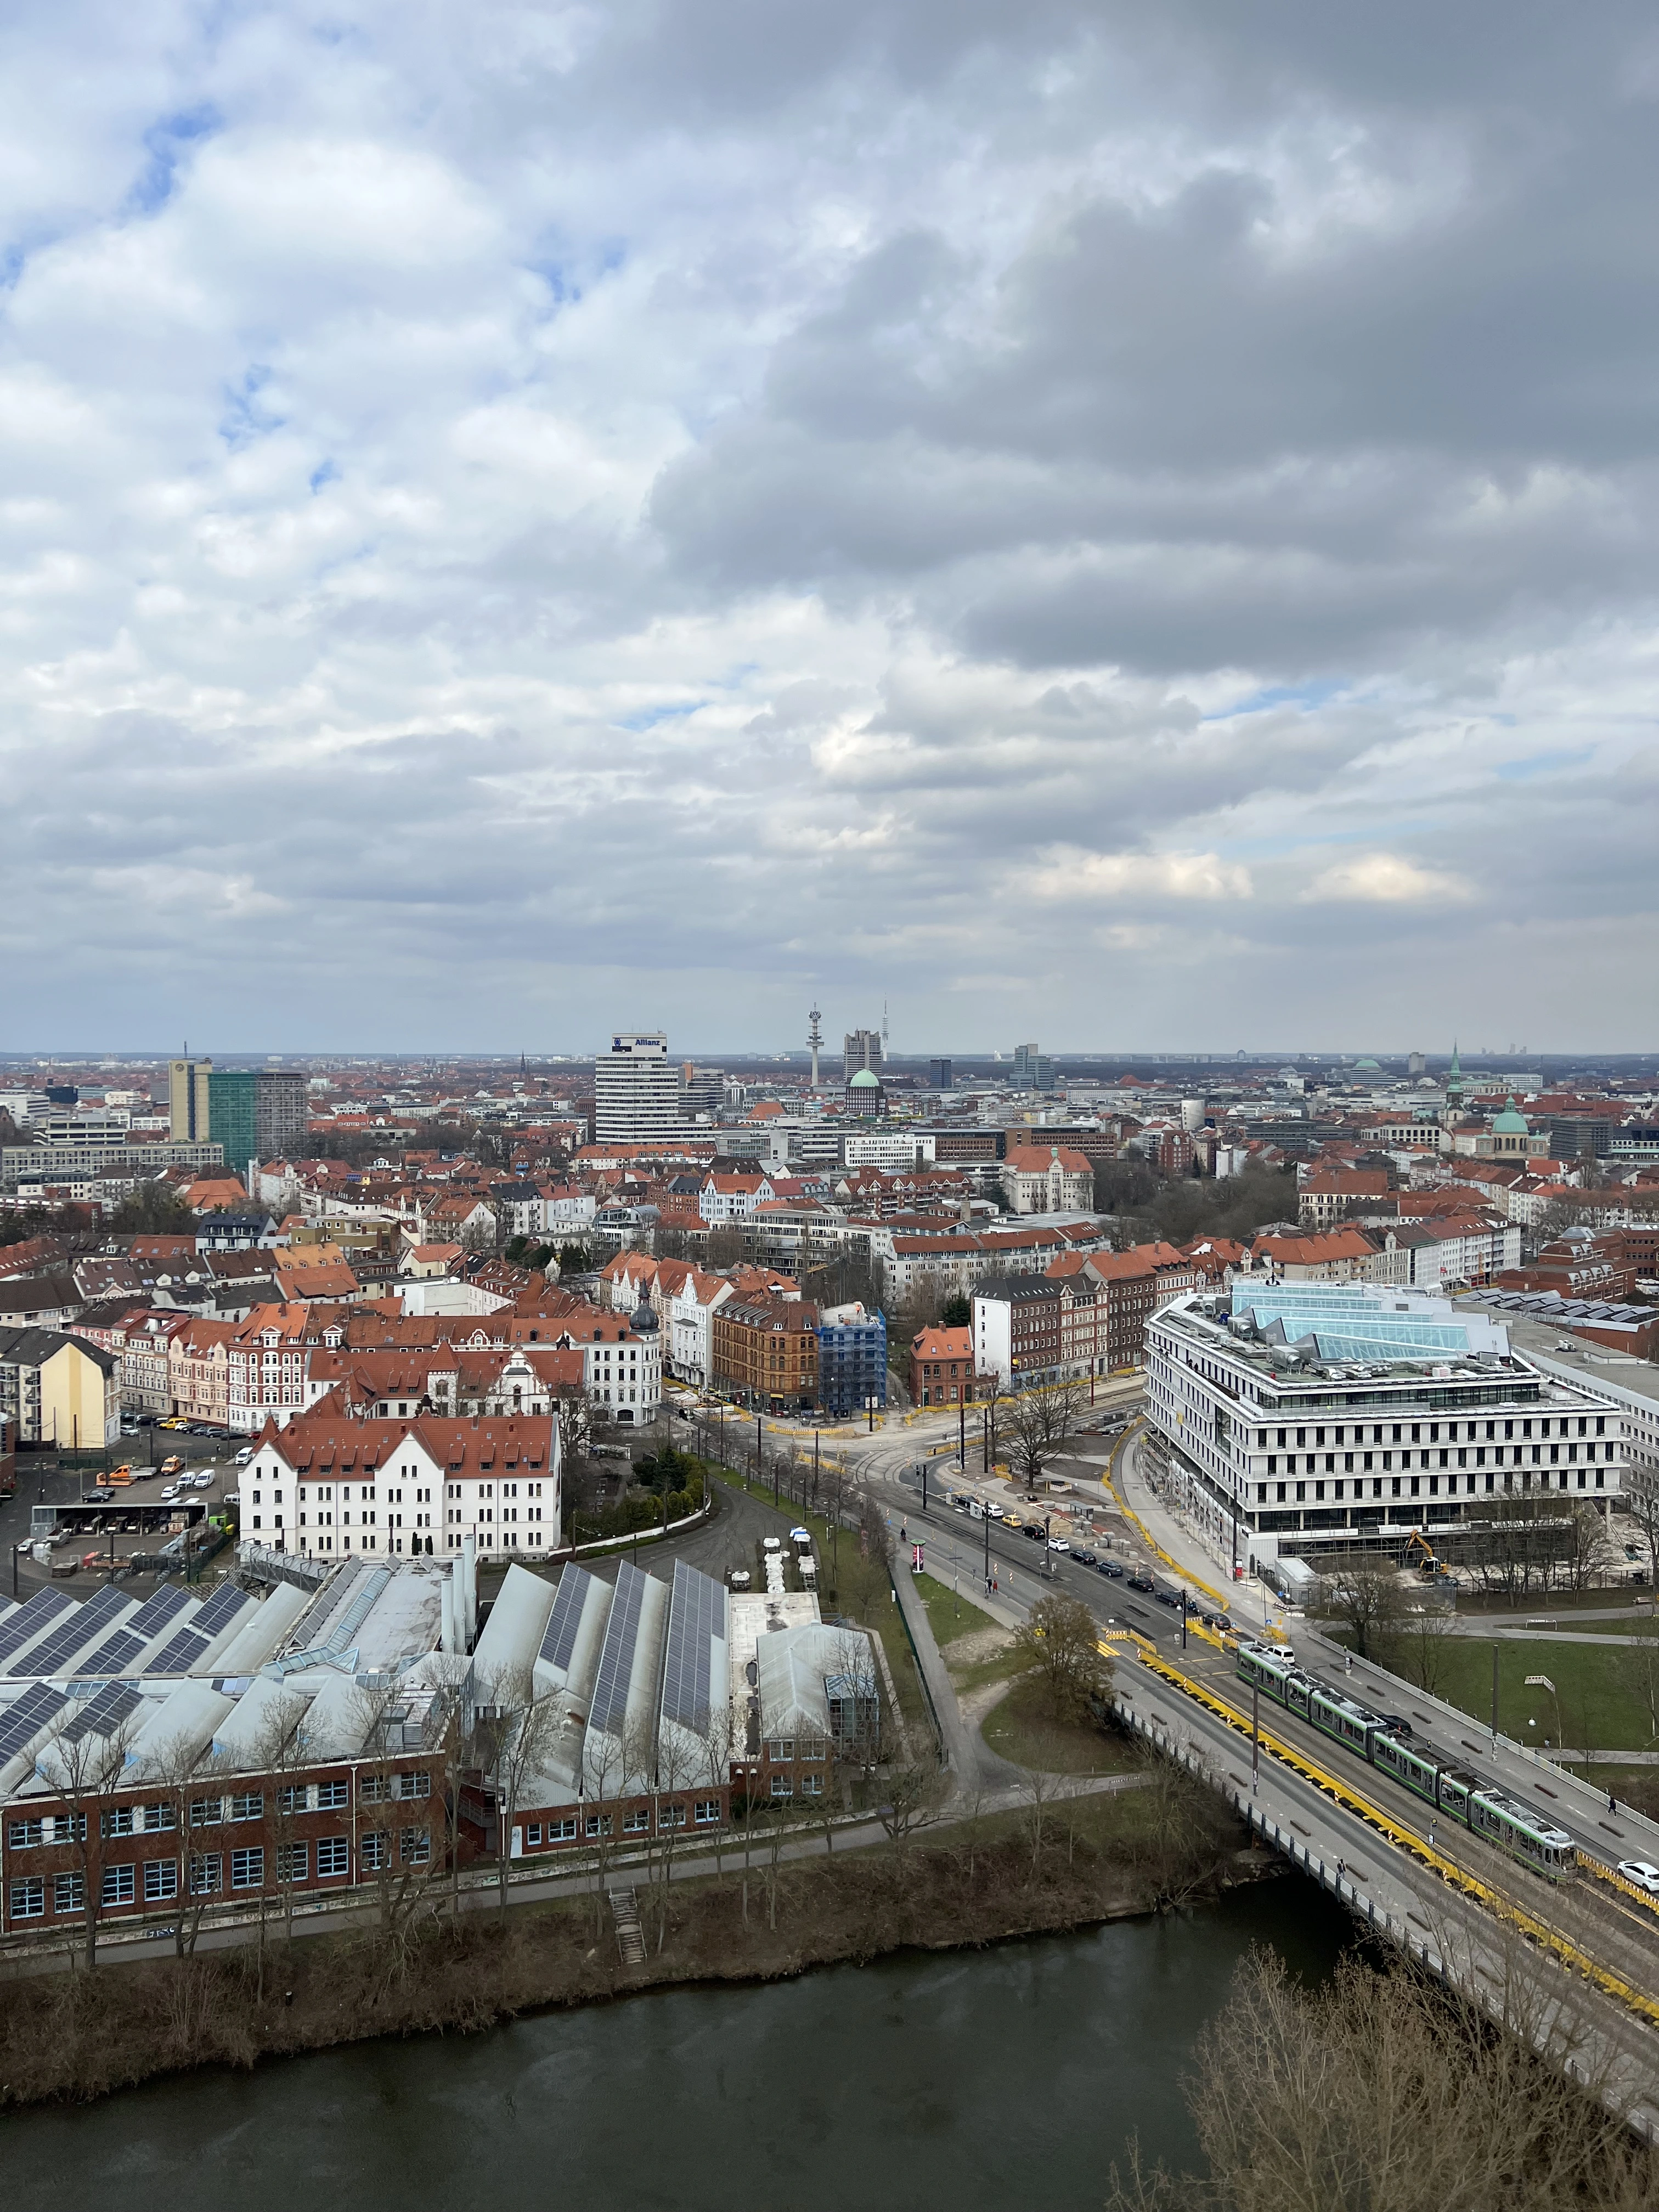 Panaroma image of Hannover